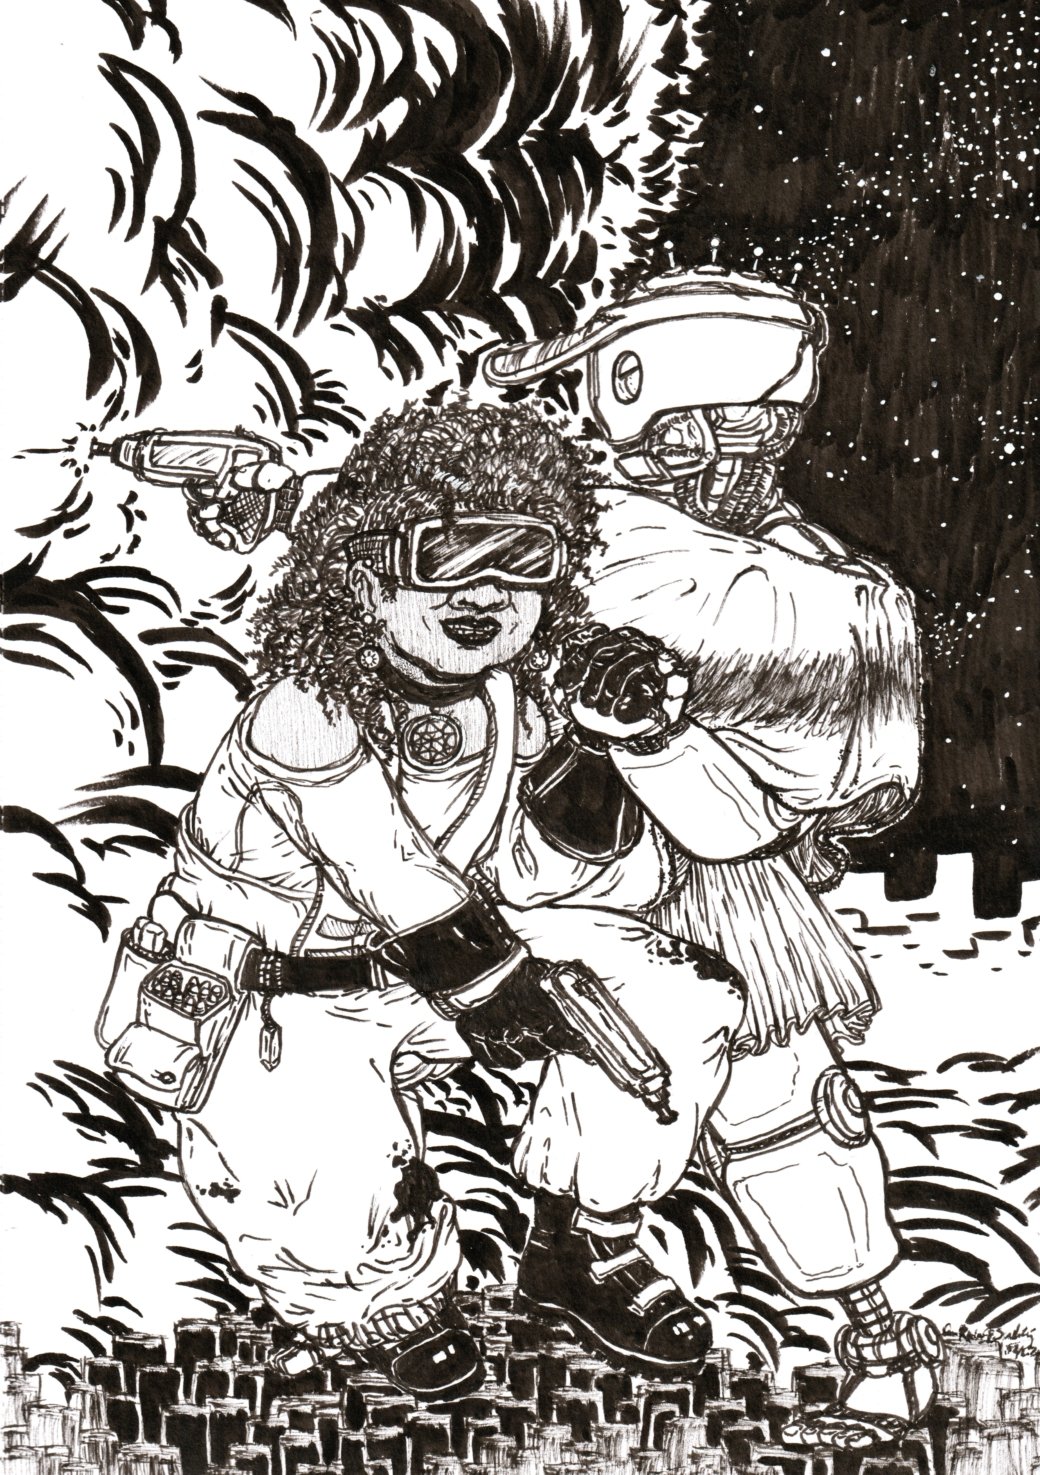 A traditional ink illustration of two characters rendered in an old school ink comic cover style. The characters are a mechanic and android. The pair are holding opposite hands together to balance on unsteady ground. The android is firing a laser gun at an unseen threat and a huge explosion cloud is rolling into the scene, covering most of the background.